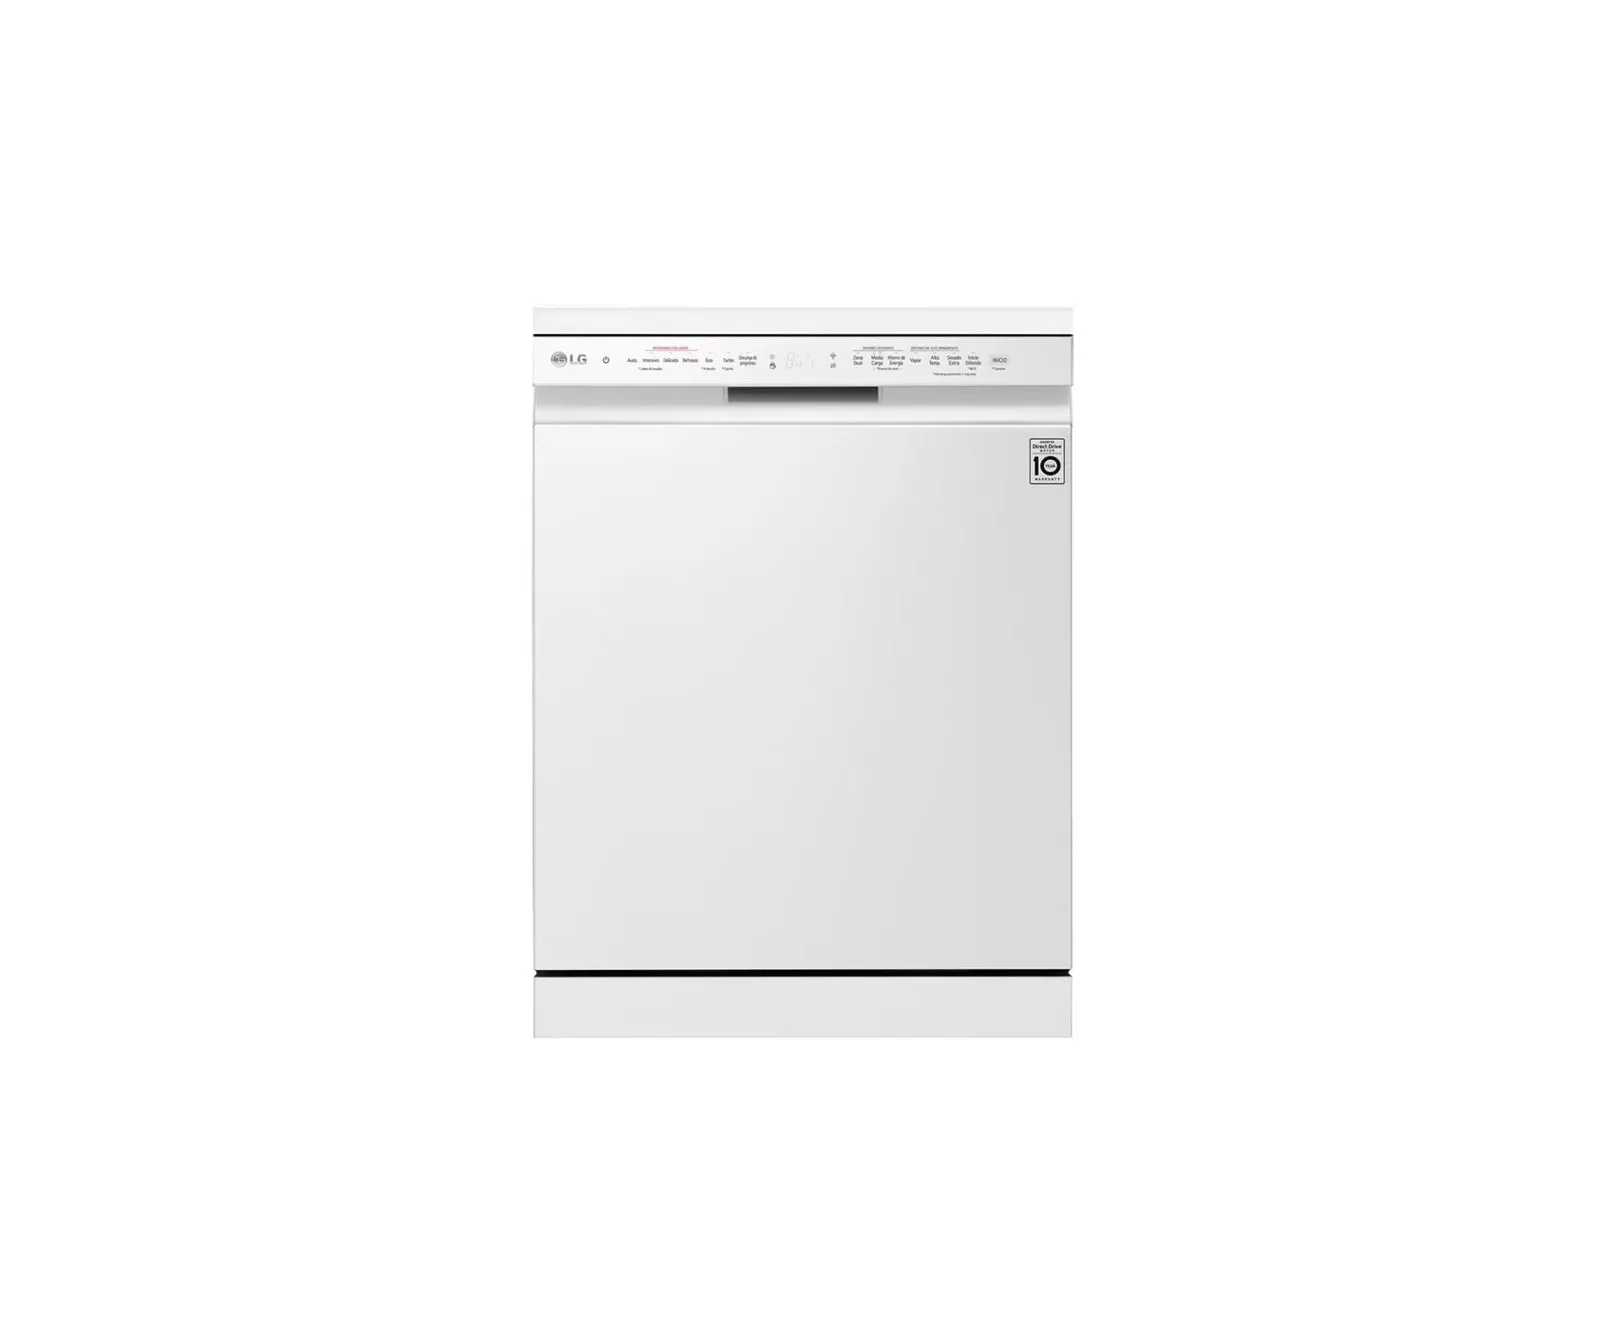 LG 9 Programs 14 Place Settings Dishwasher User Manual Free Standing Steam ThinQ Inverter Direct Turbo Cycle Quiet Efficient Reliable Color White Model –  DFC425FW – International Version.